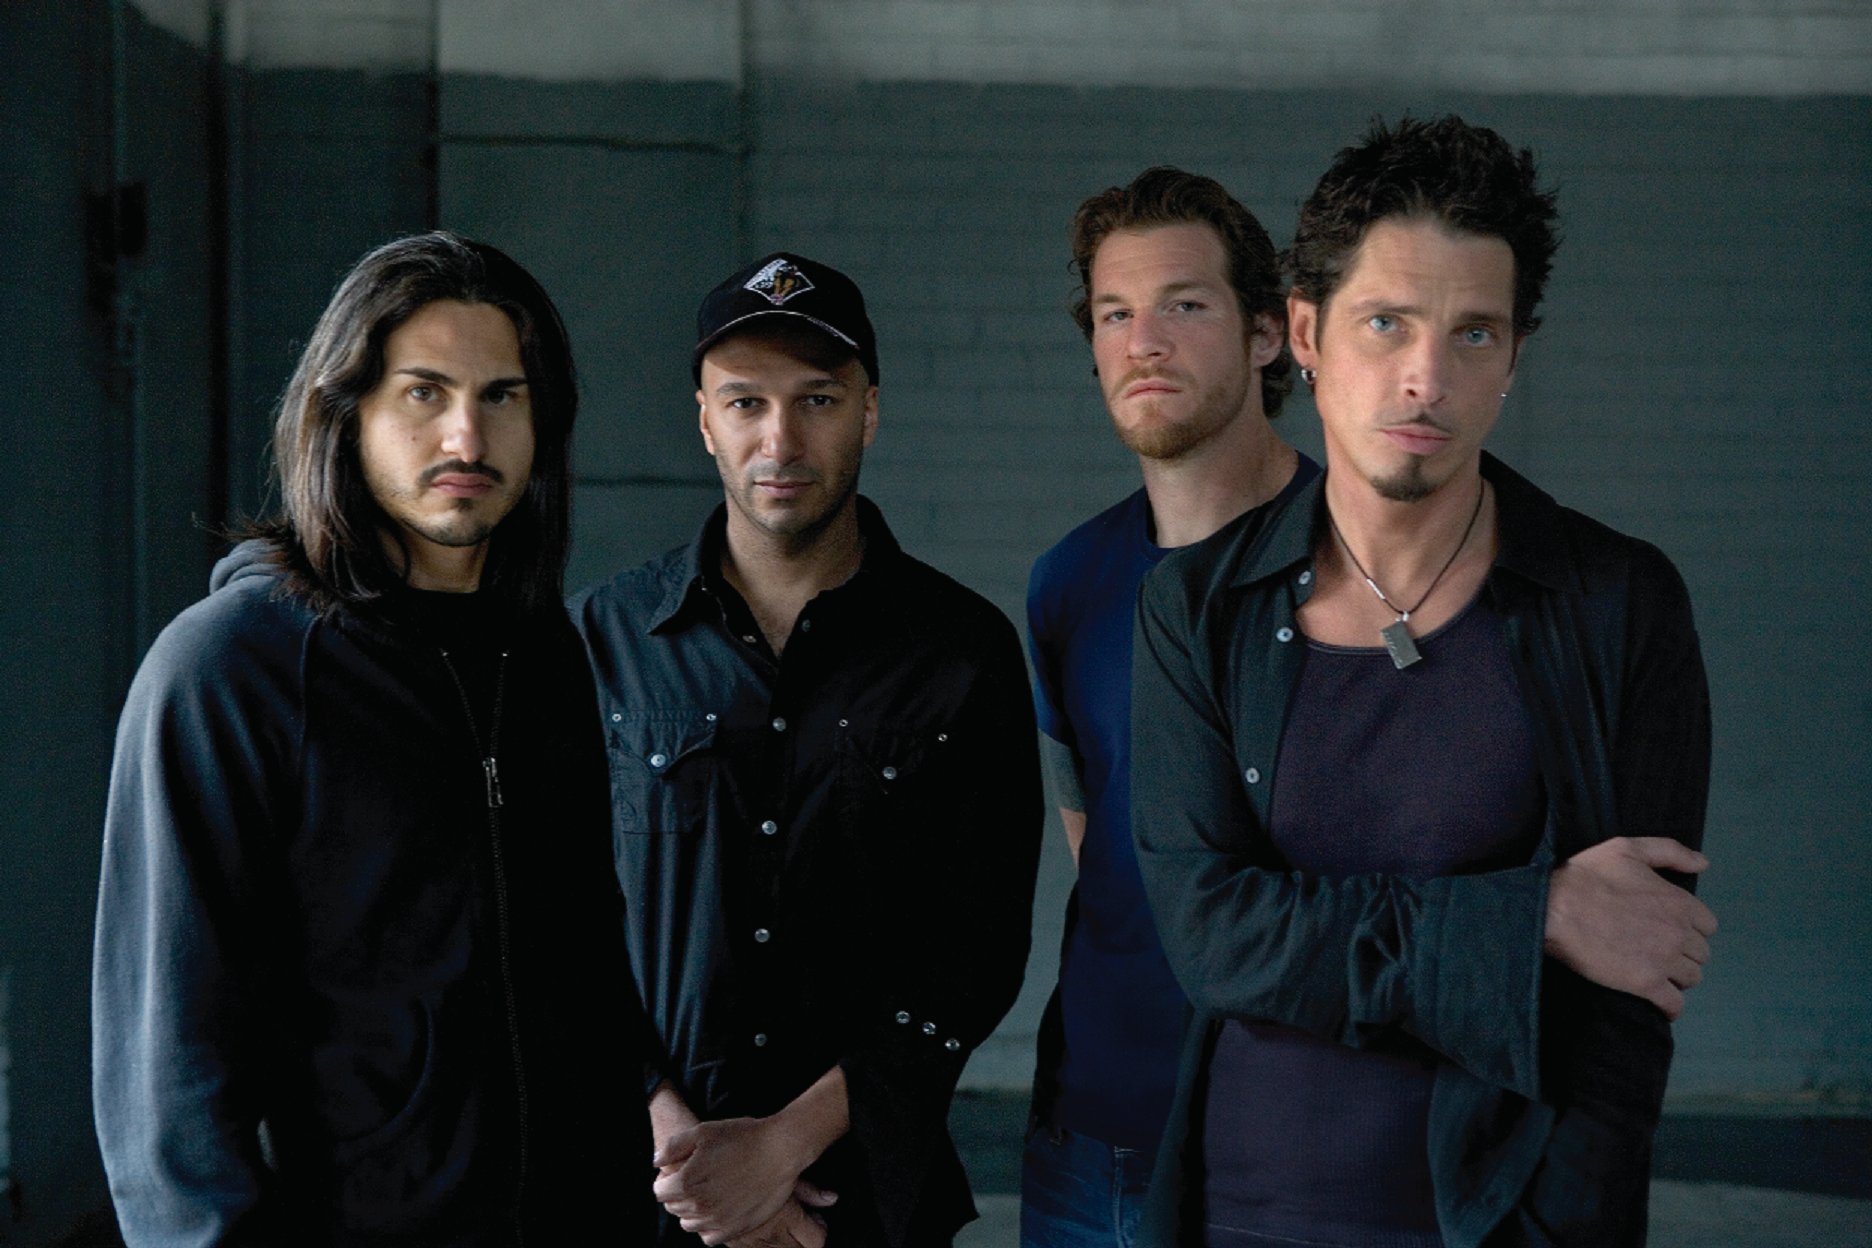 Image result for audioslave